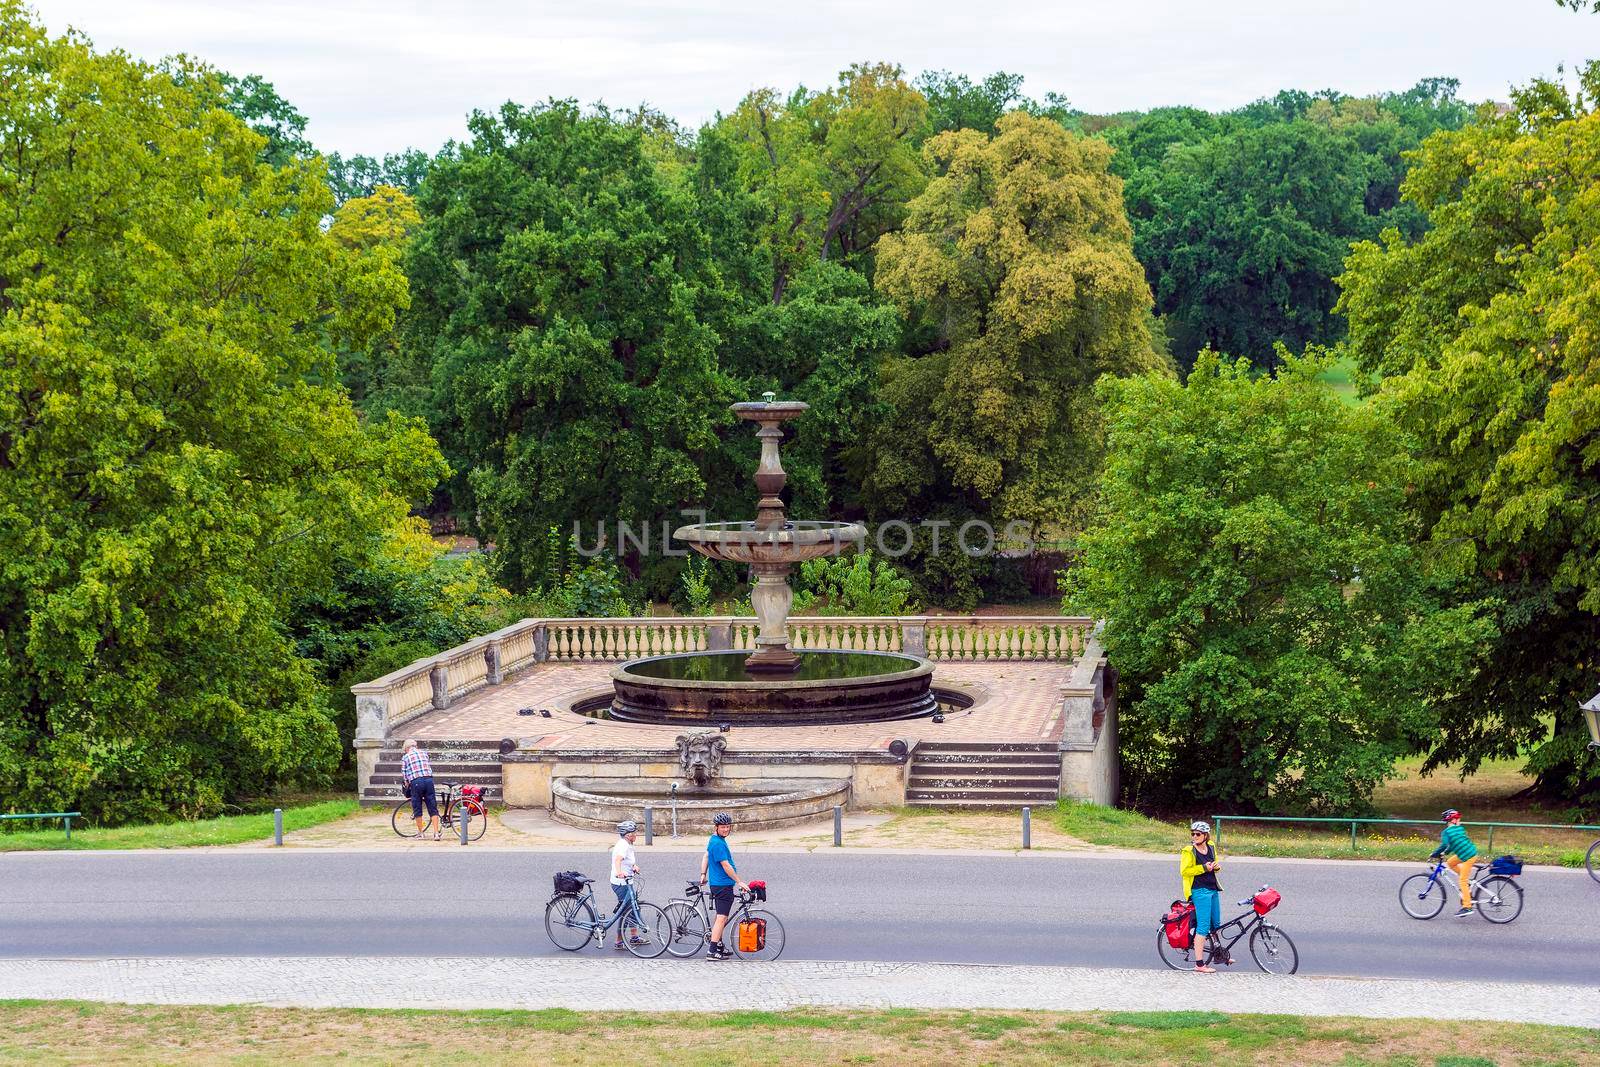 View of the Rossbrunnen fountain in Sanssouci park in Potsdam, Germany by ankarb